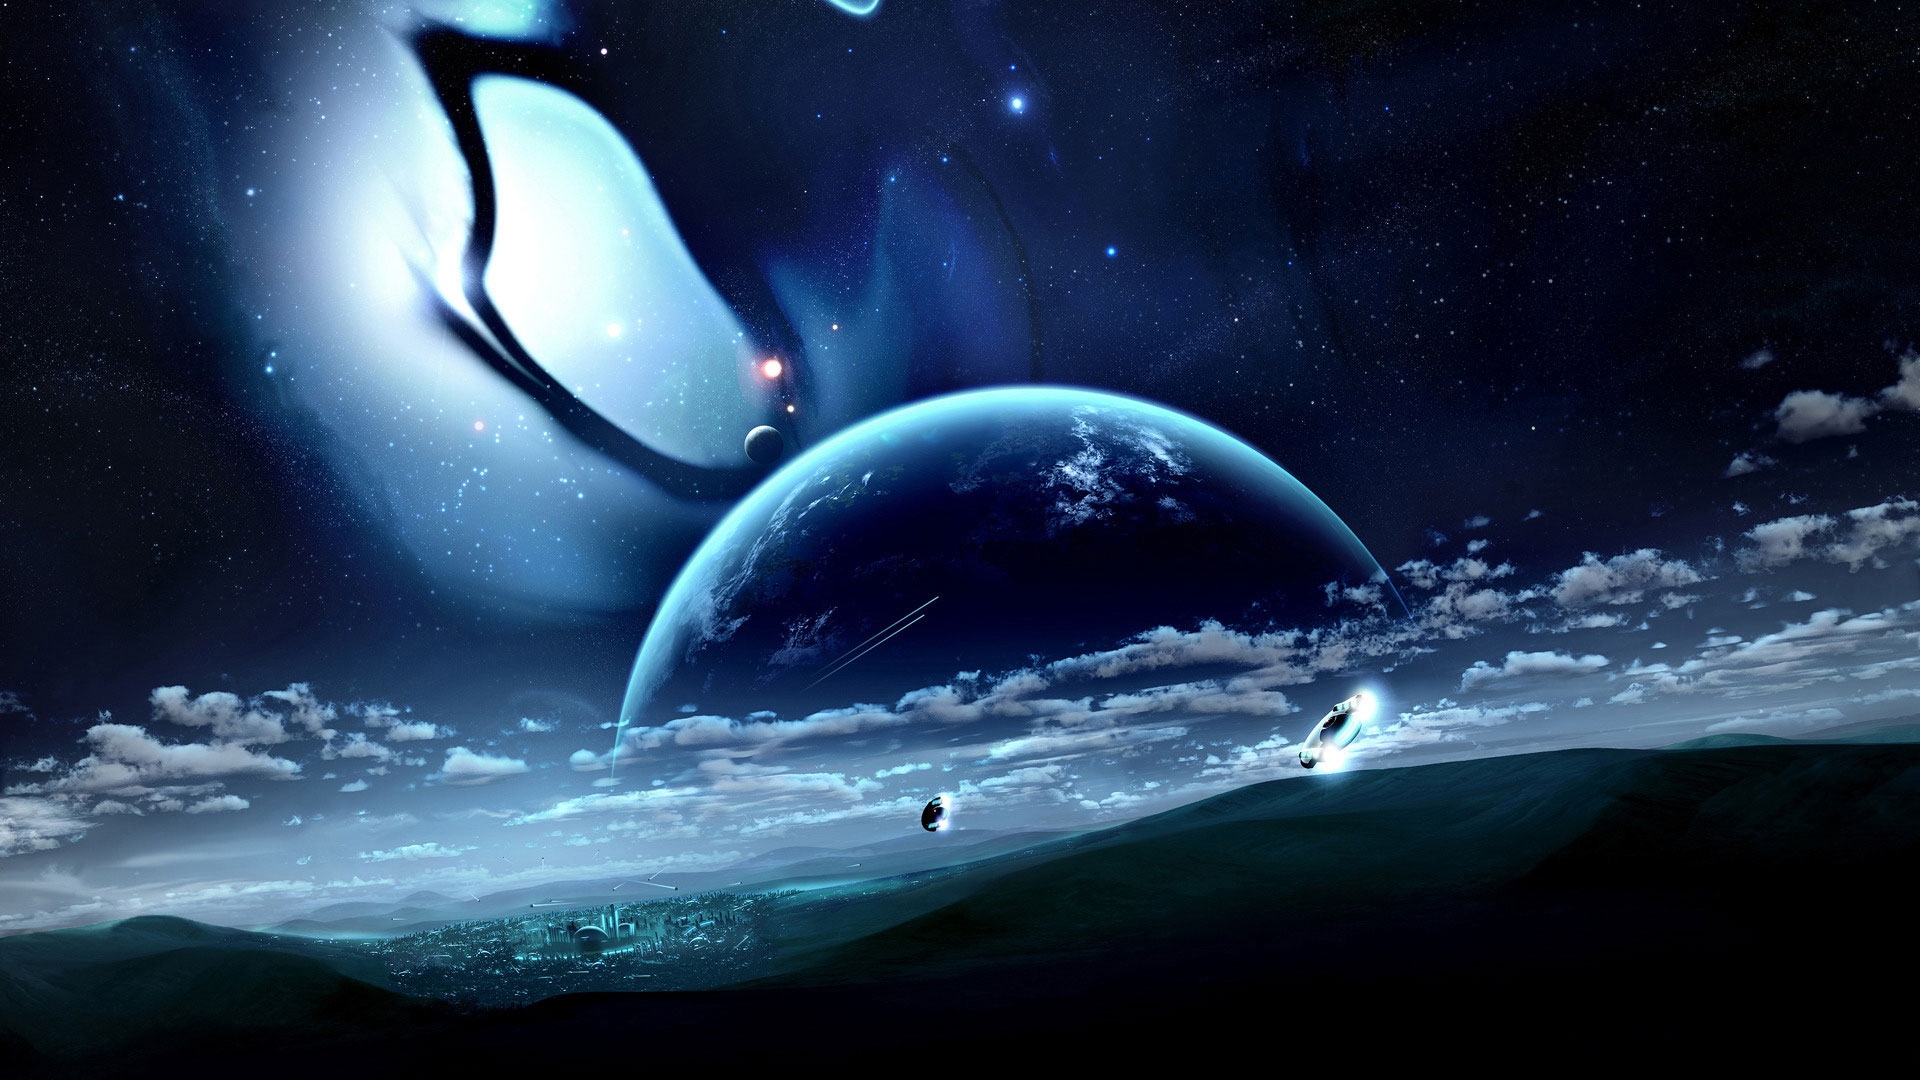 Free Good Night Images - Alien Planet Background - HD Wallpaper 